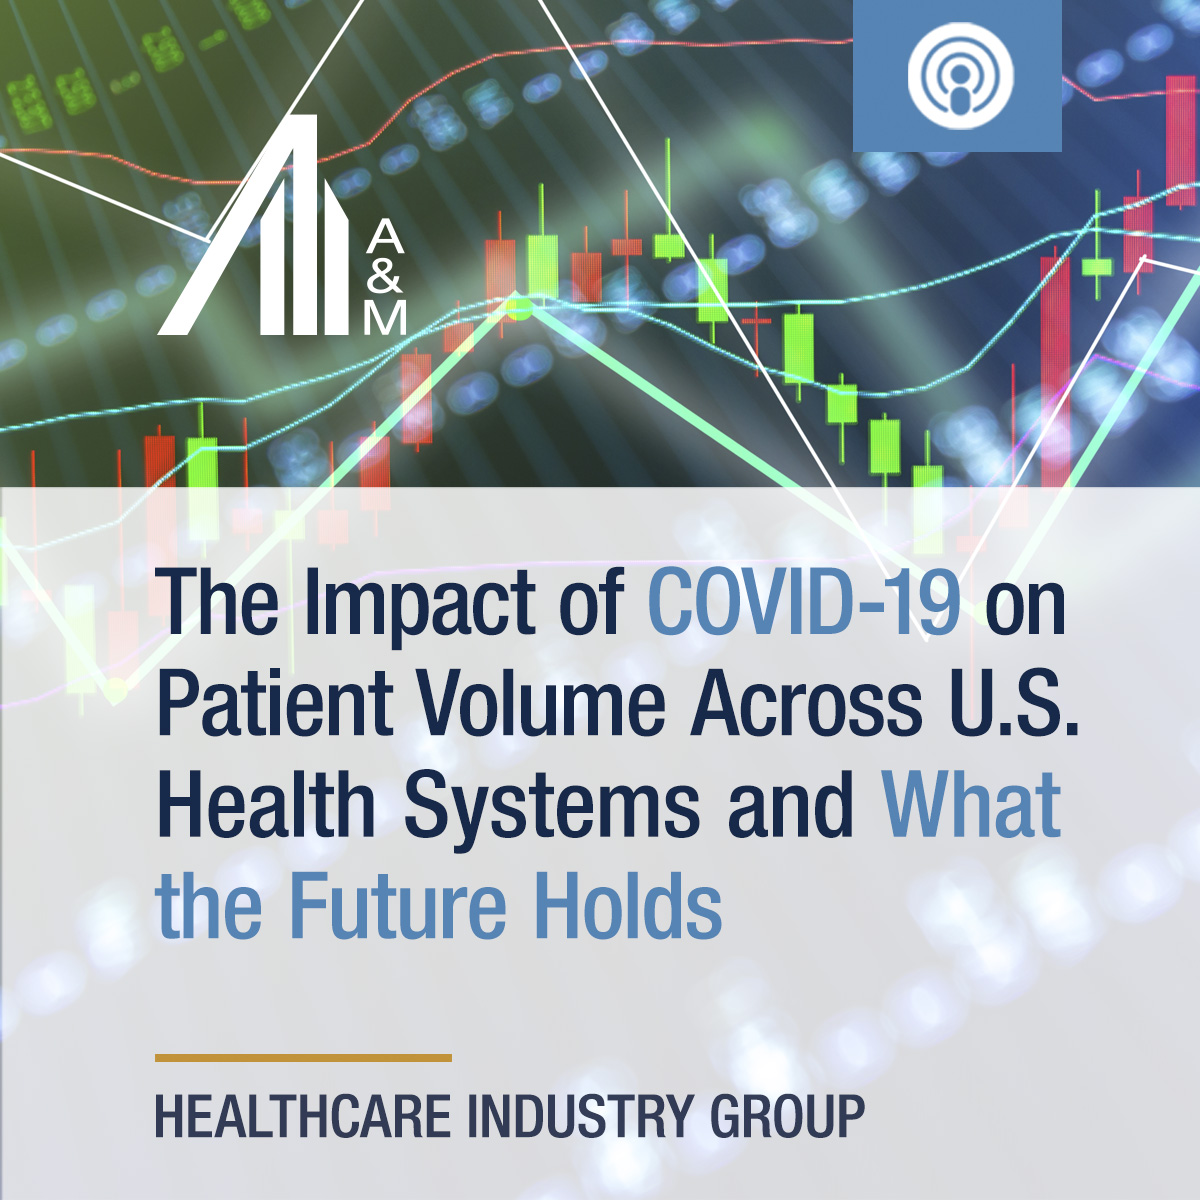 The Impact of COVID-19 on Patient Volume Across U.S. Health Systems & What the Future Holds - Part I